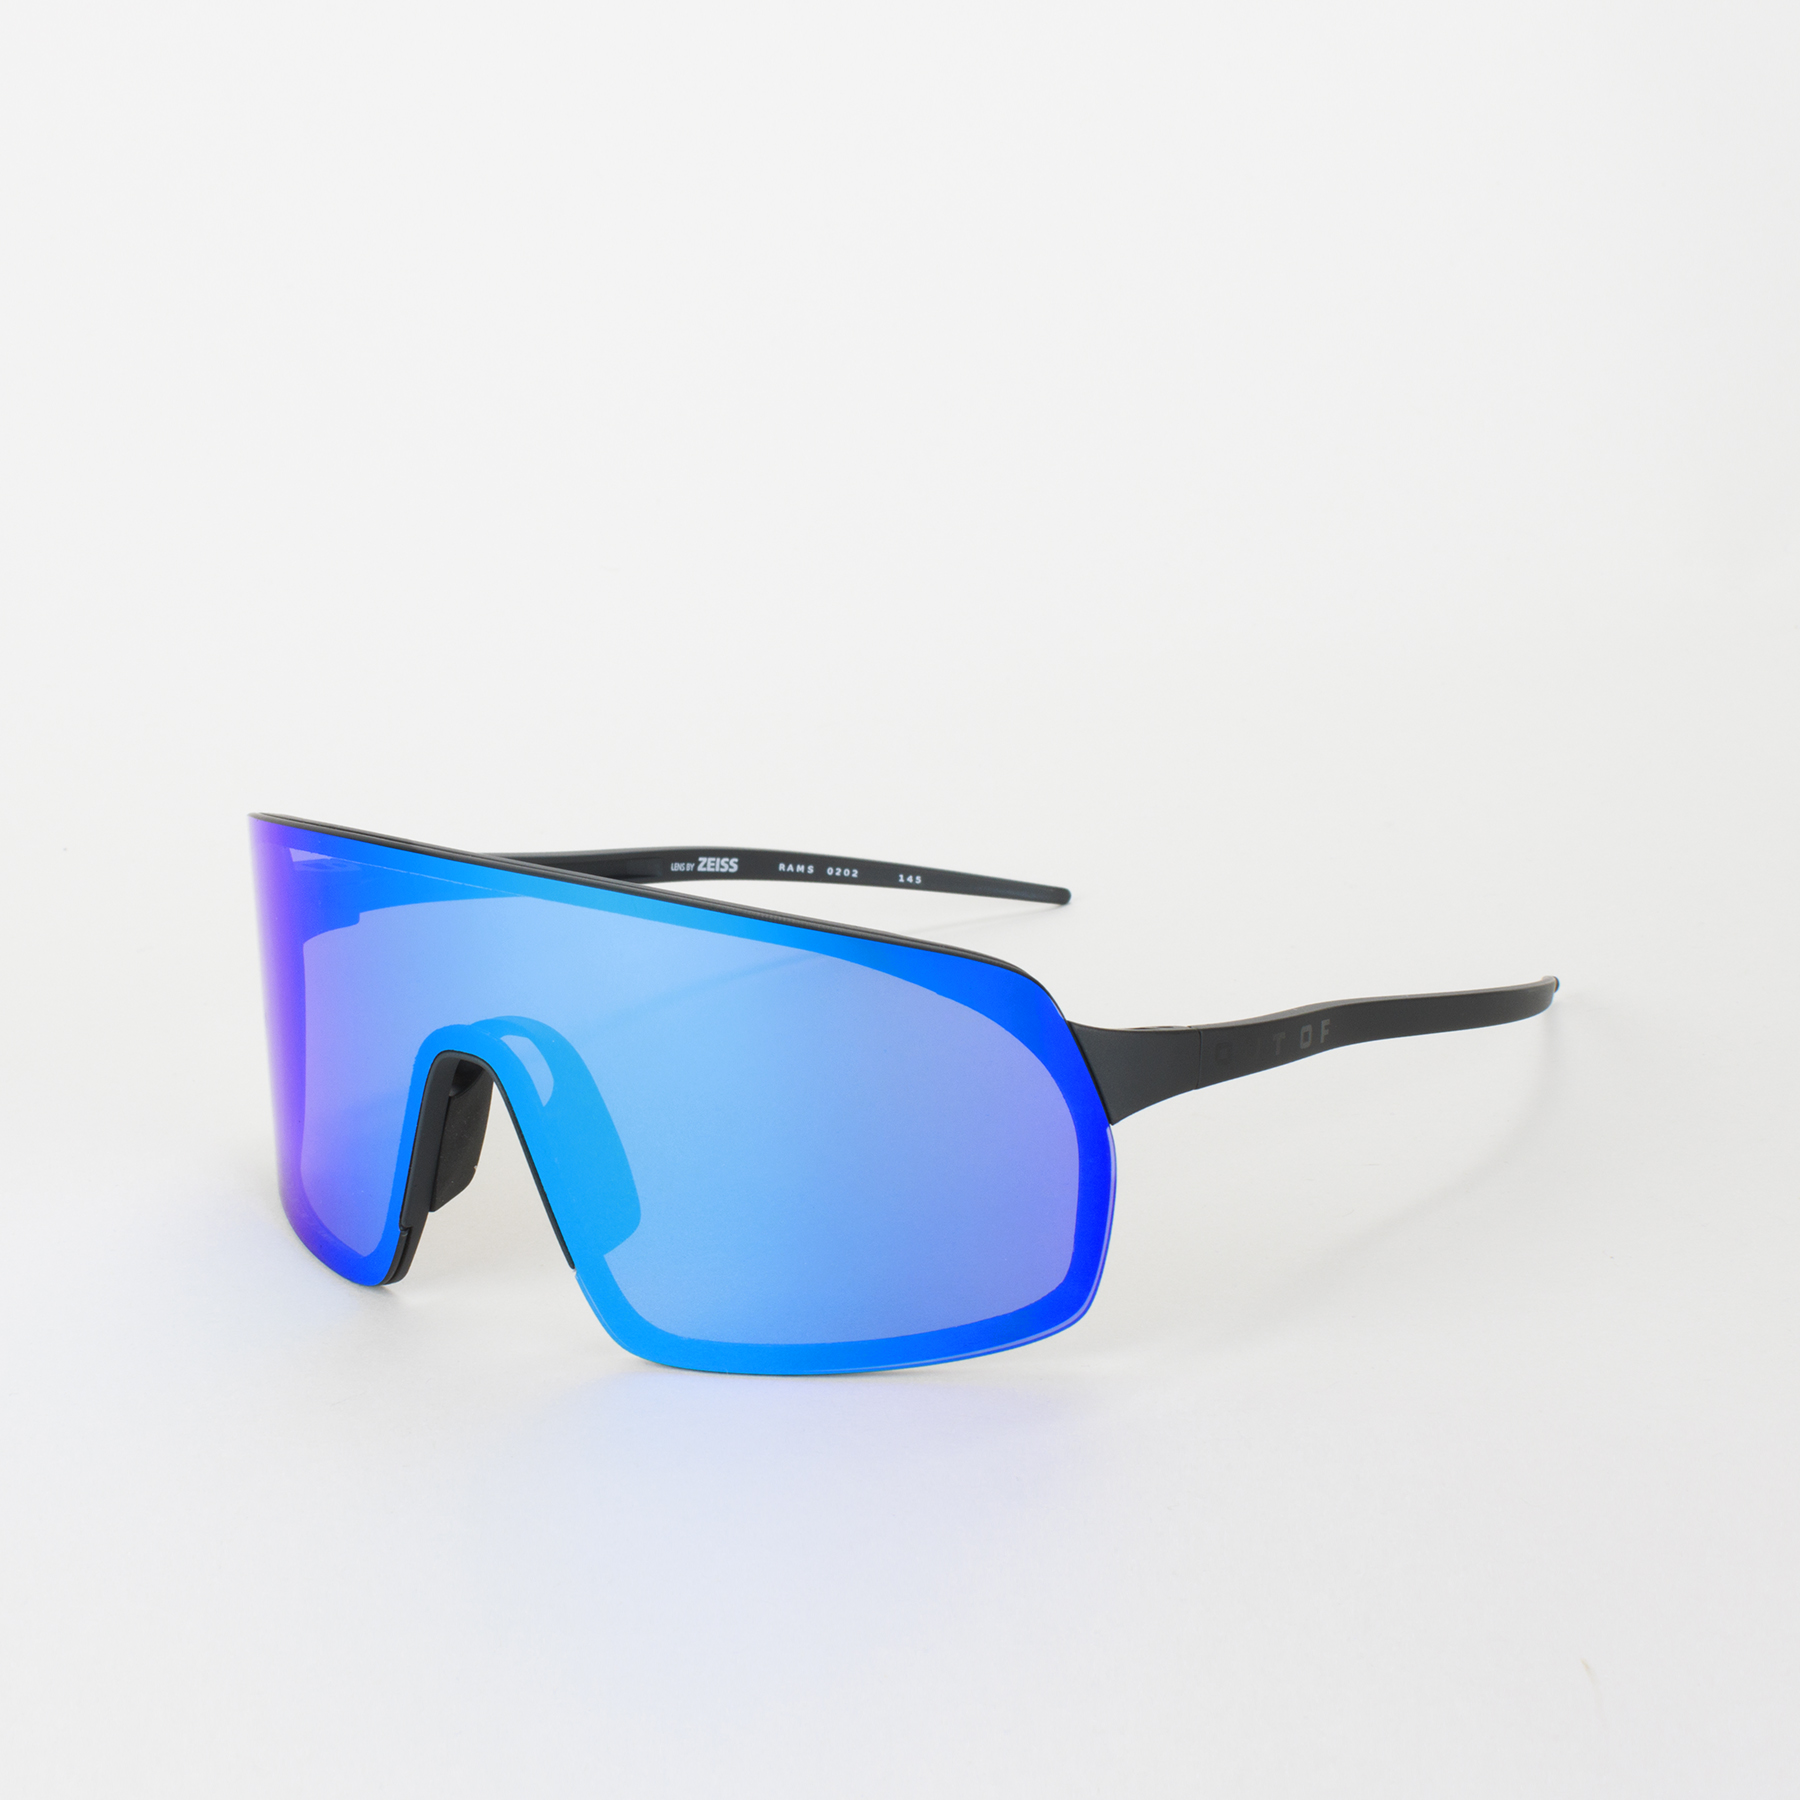 Sports sunglasses OUT OF Rams blue on the white background, view slightly from the side